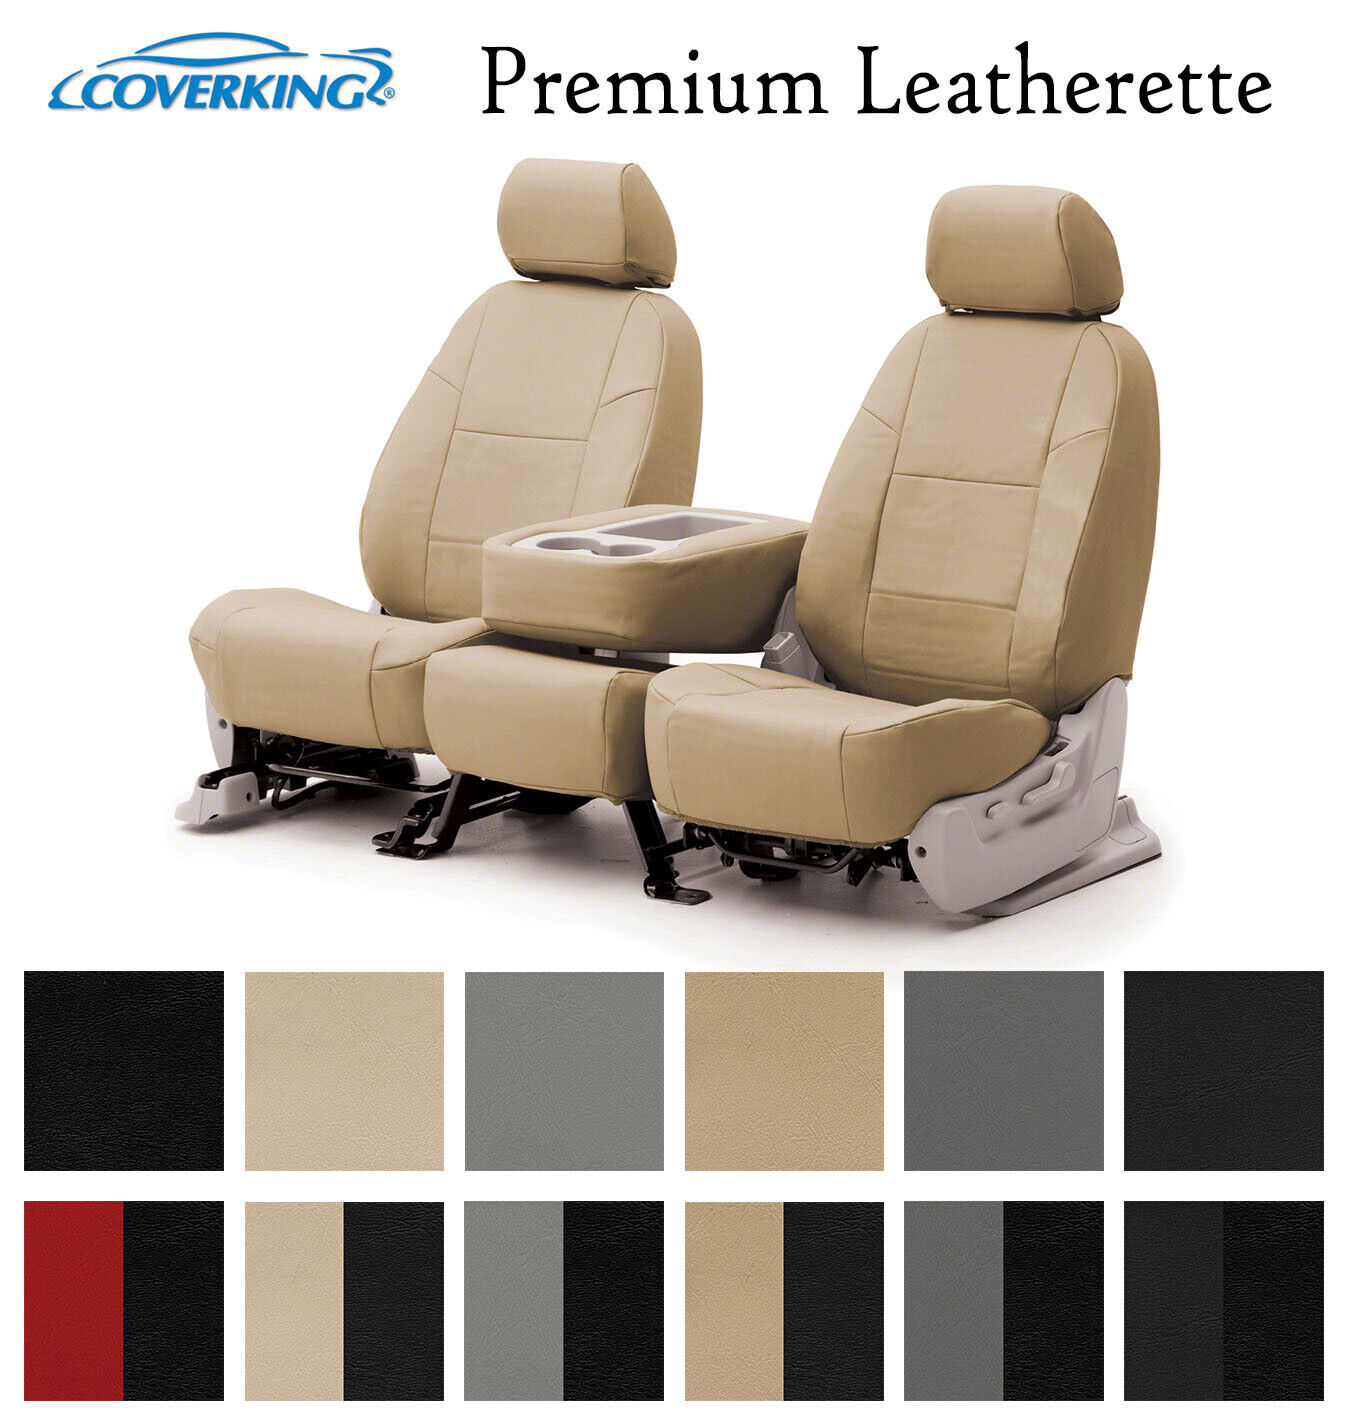 Coverking Custom Seat Covers Premium Leatherette Front Row - 12 Color Options